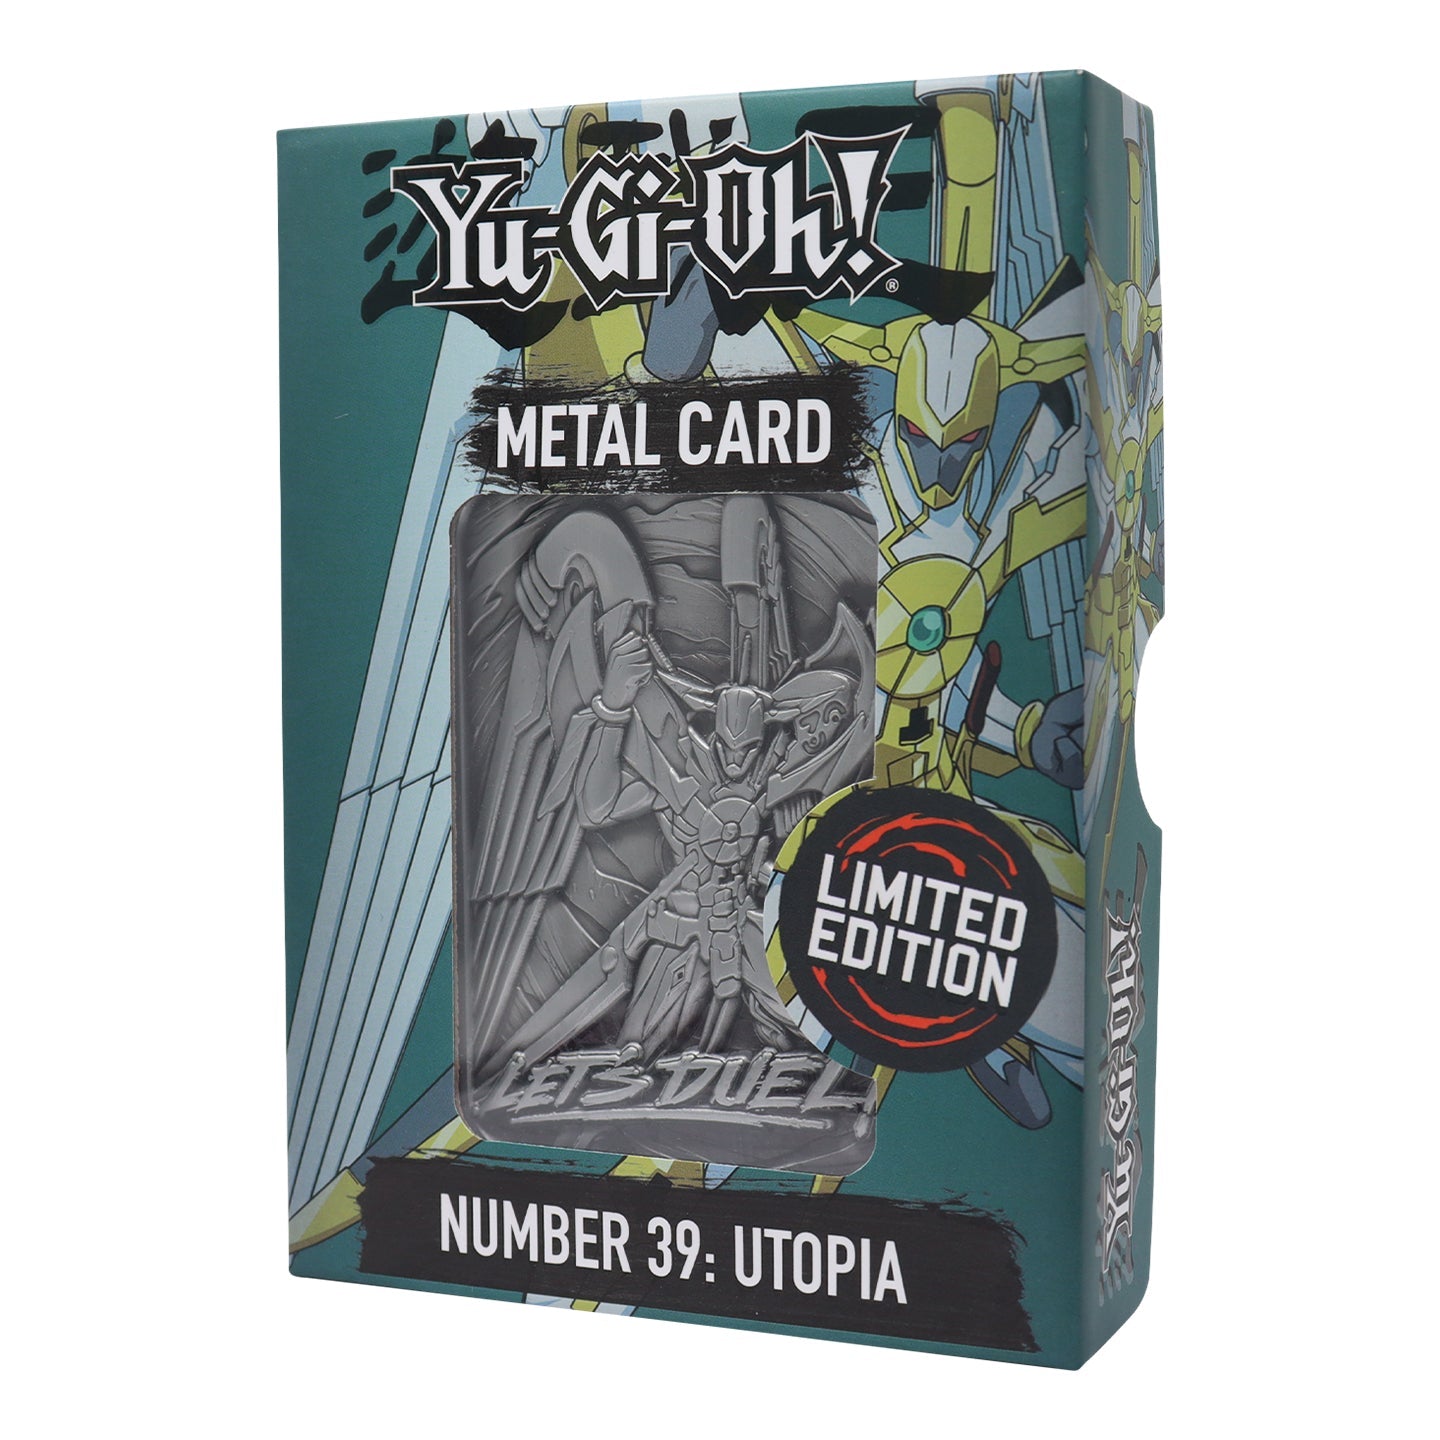 Yu-Gi-Oh! Limited Edition Number 39 Utopia Metal Card